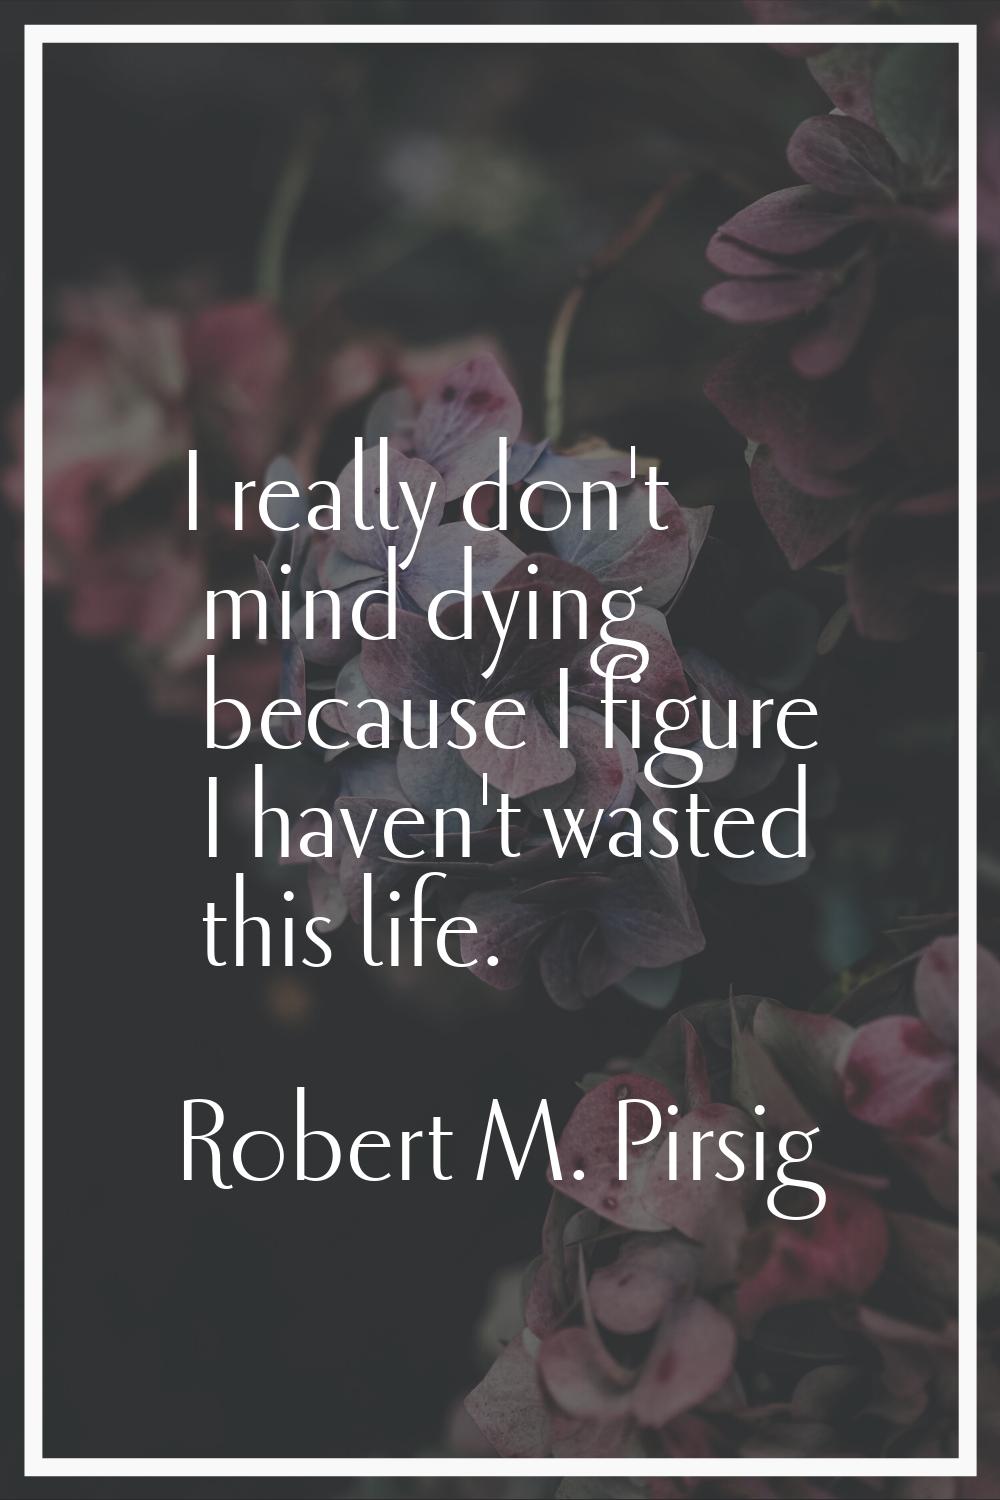 I really don't mind dying because I figure I haven't wasted this life.